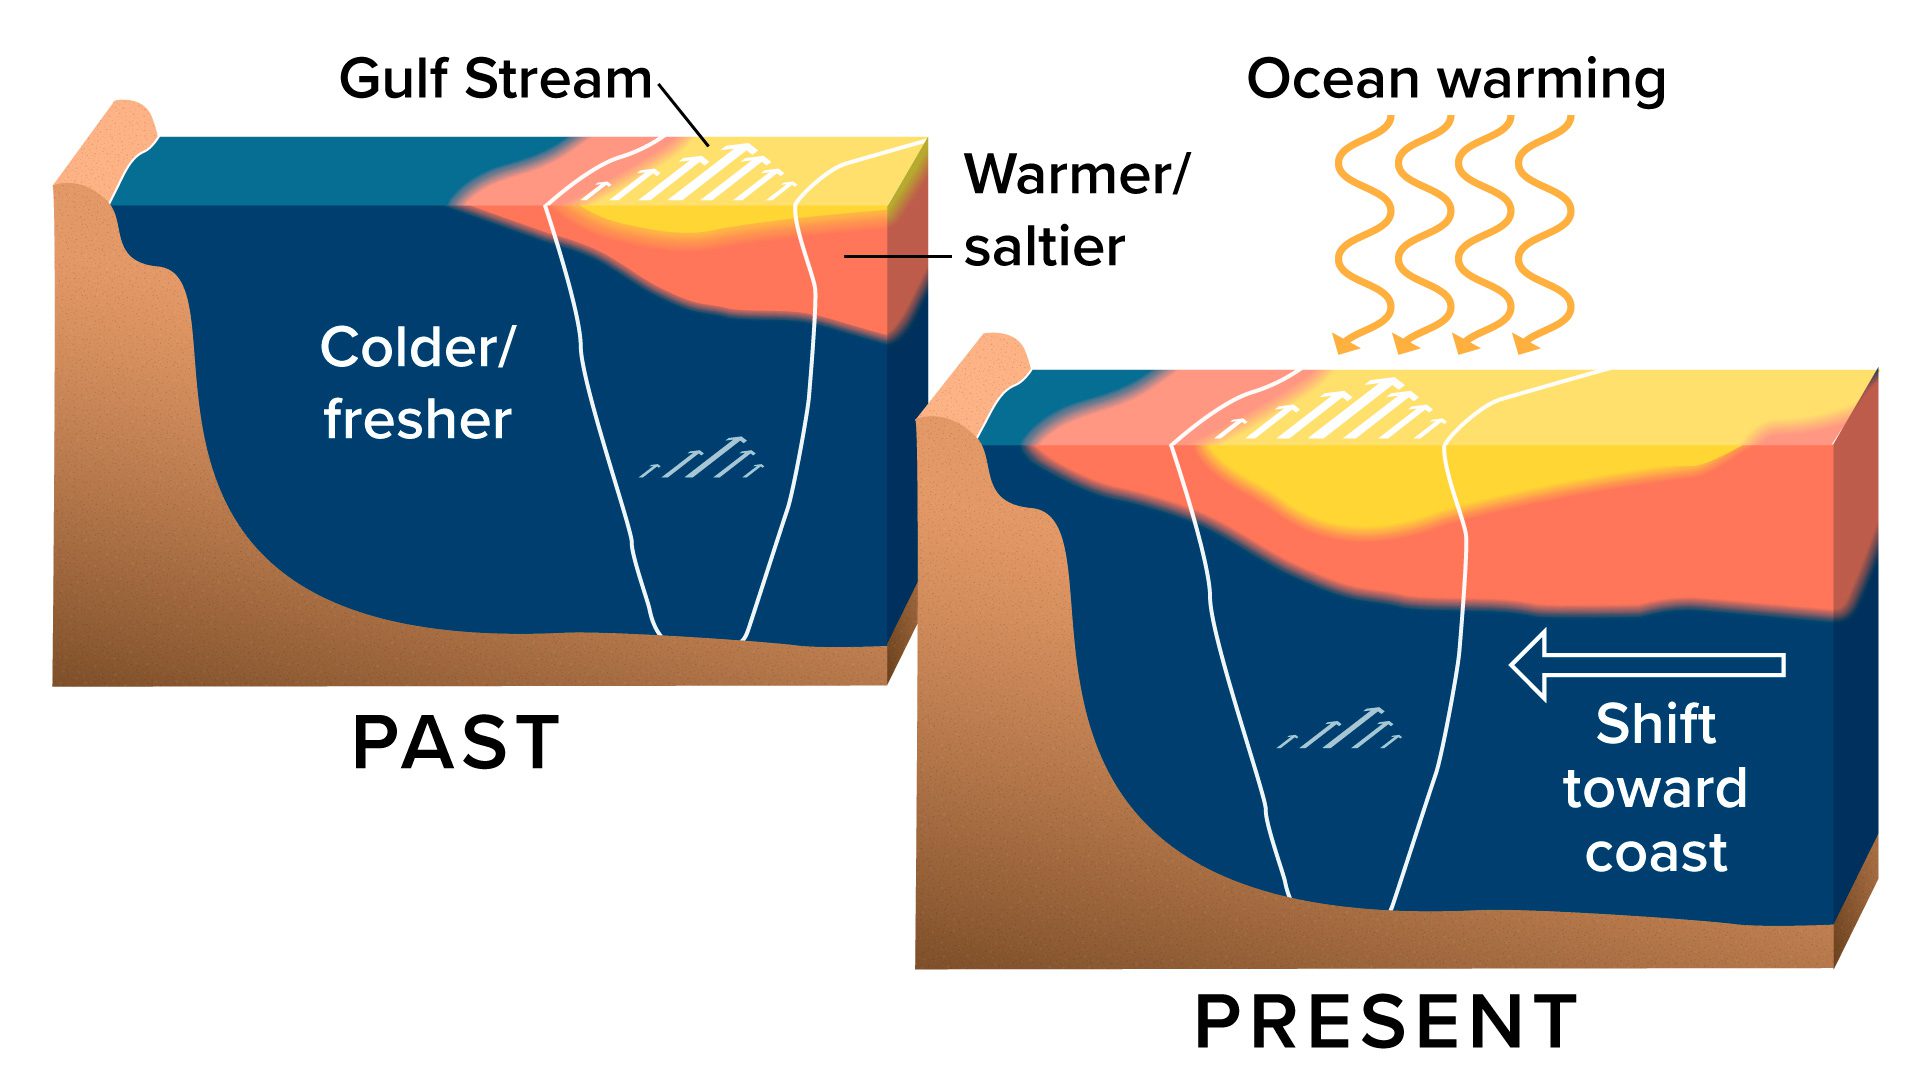 Warming in and near the Gulf Stream at present compared to the early 21st century is driven by heat from the atmosphere as well as a gradual shift of the Gulf Stream toward the coast. (Illustration by Natalie Renier ©Woods Hole Oceanographic Institution)